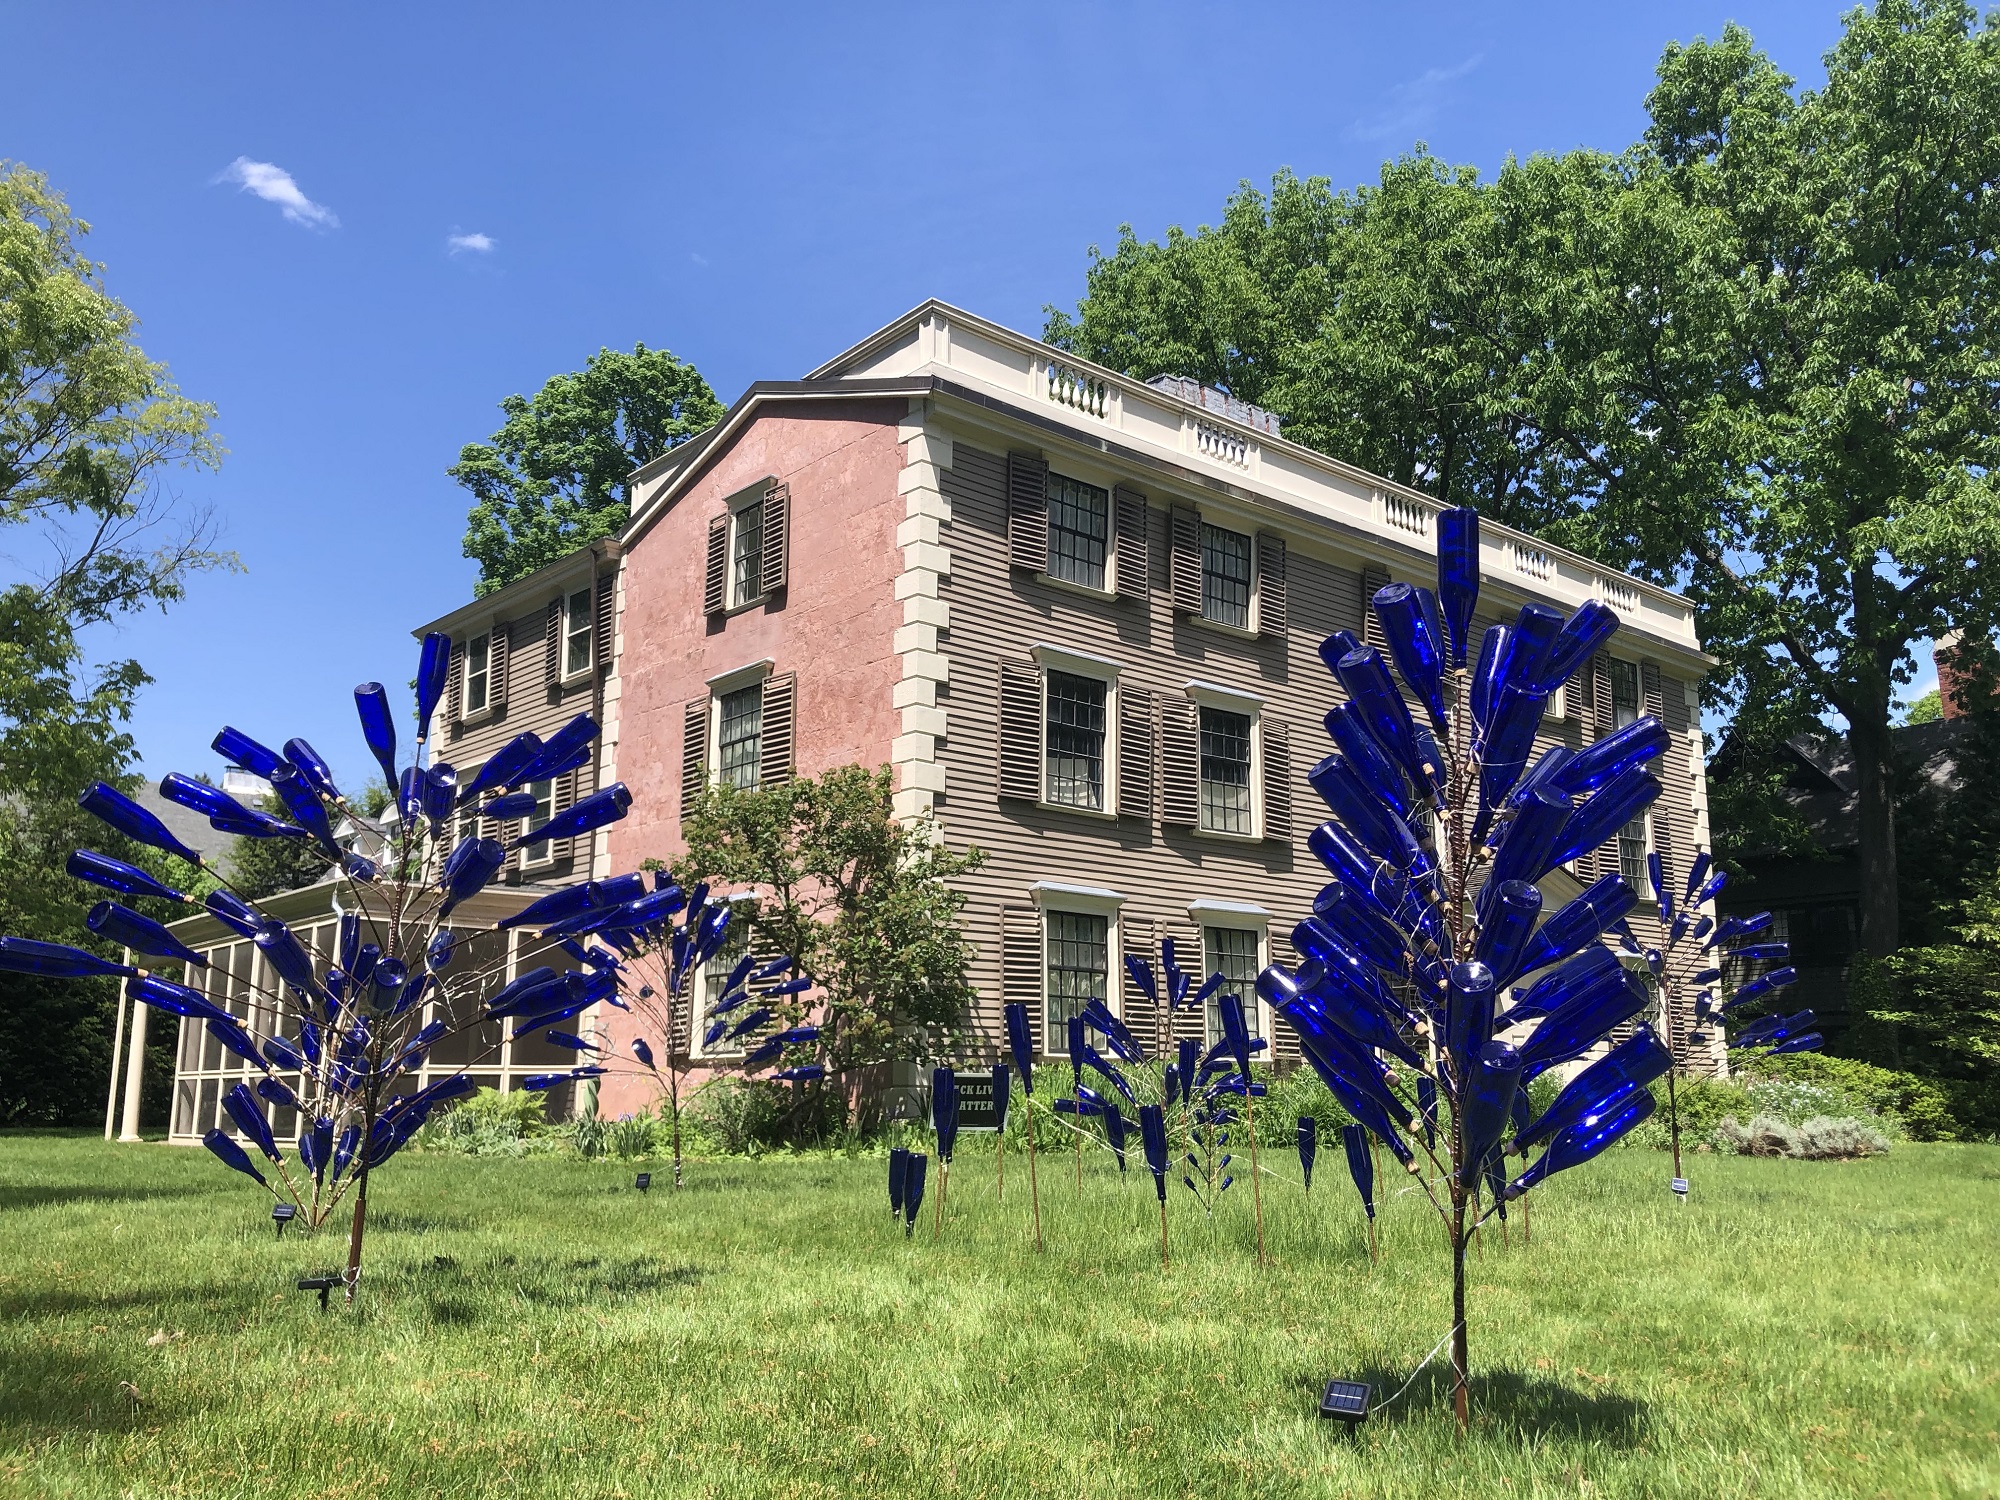 Blue bottle trees on the front lawn of the Hoopeer-Lee-Nichols House